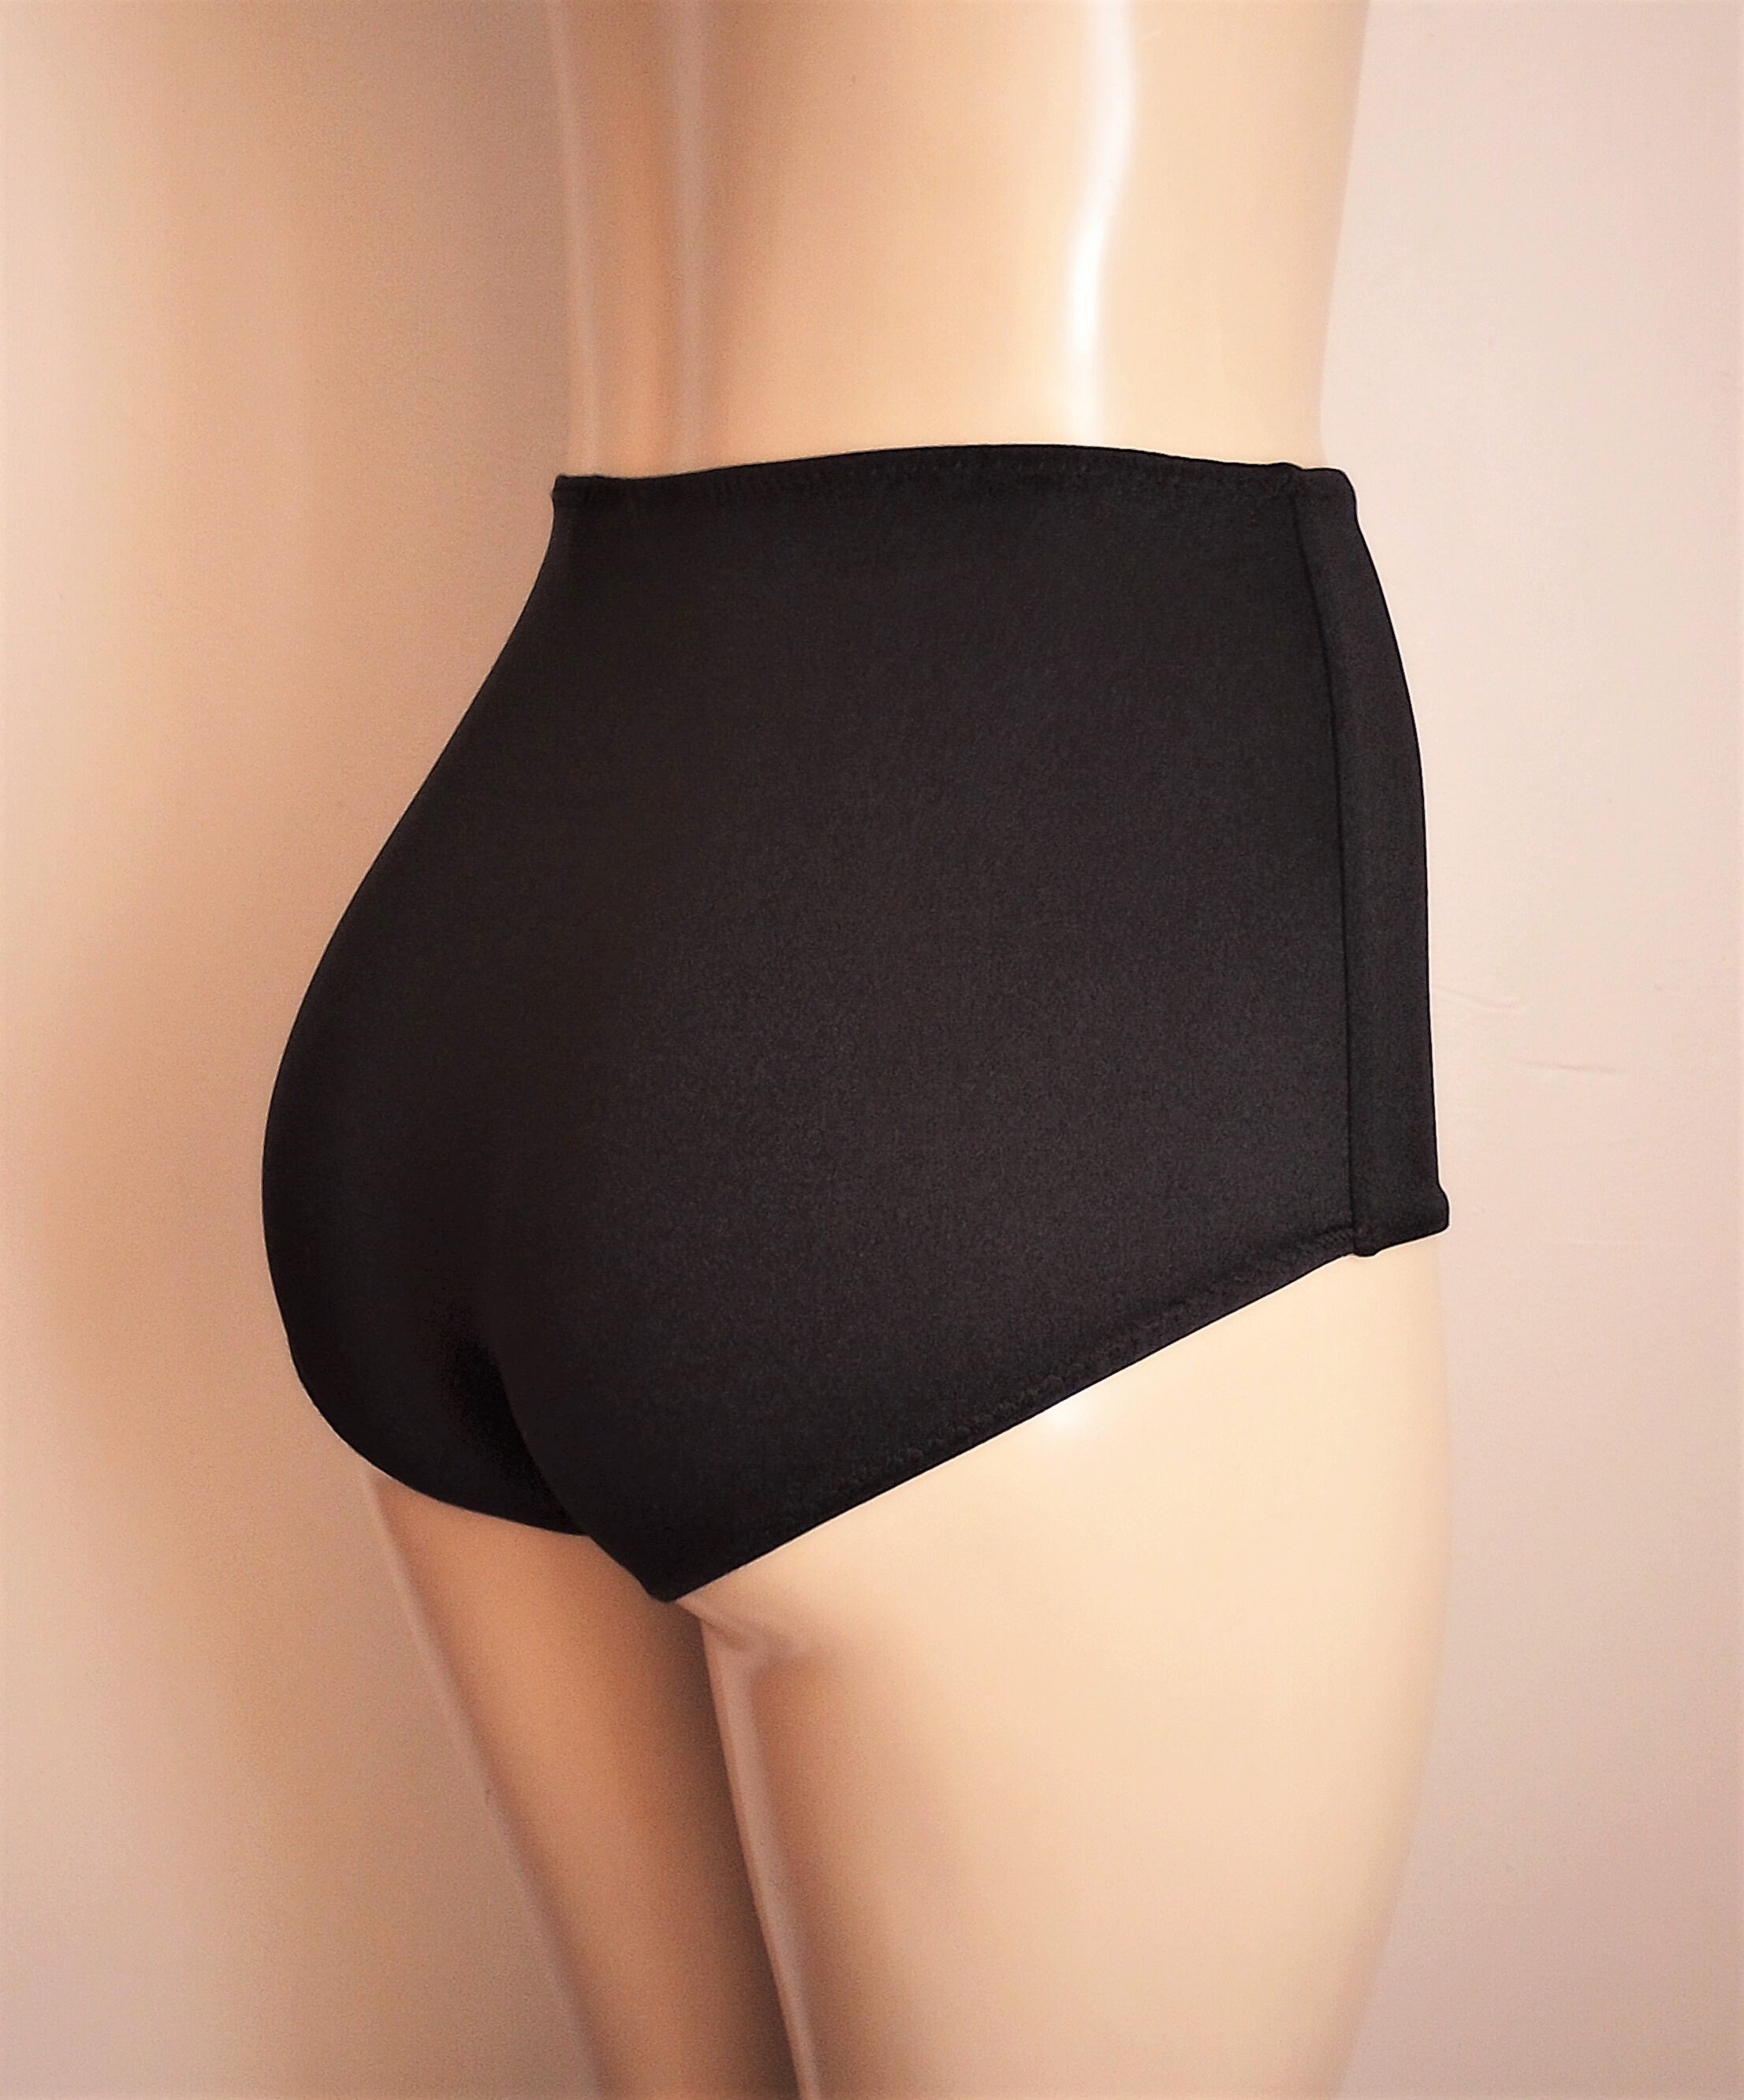 Sailor bottoms high waisted style swimsuit bottoms with metal gold